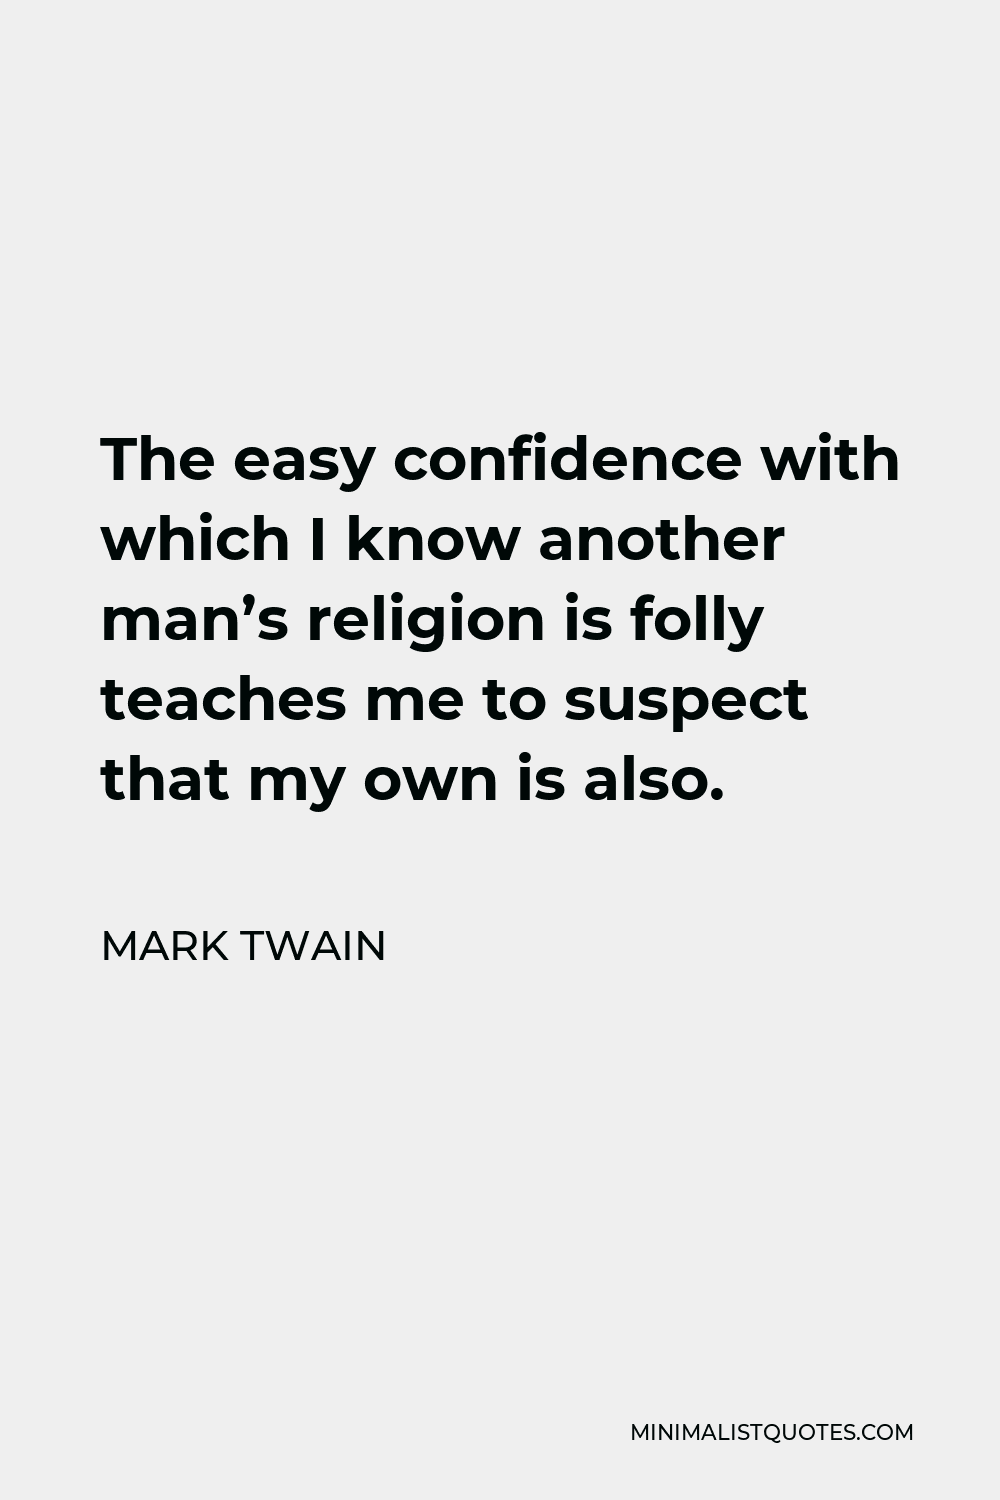 Mark Twain Quote - The easy confidence with which I know another man’s religion is folly teaches me to suspect that my own is also.